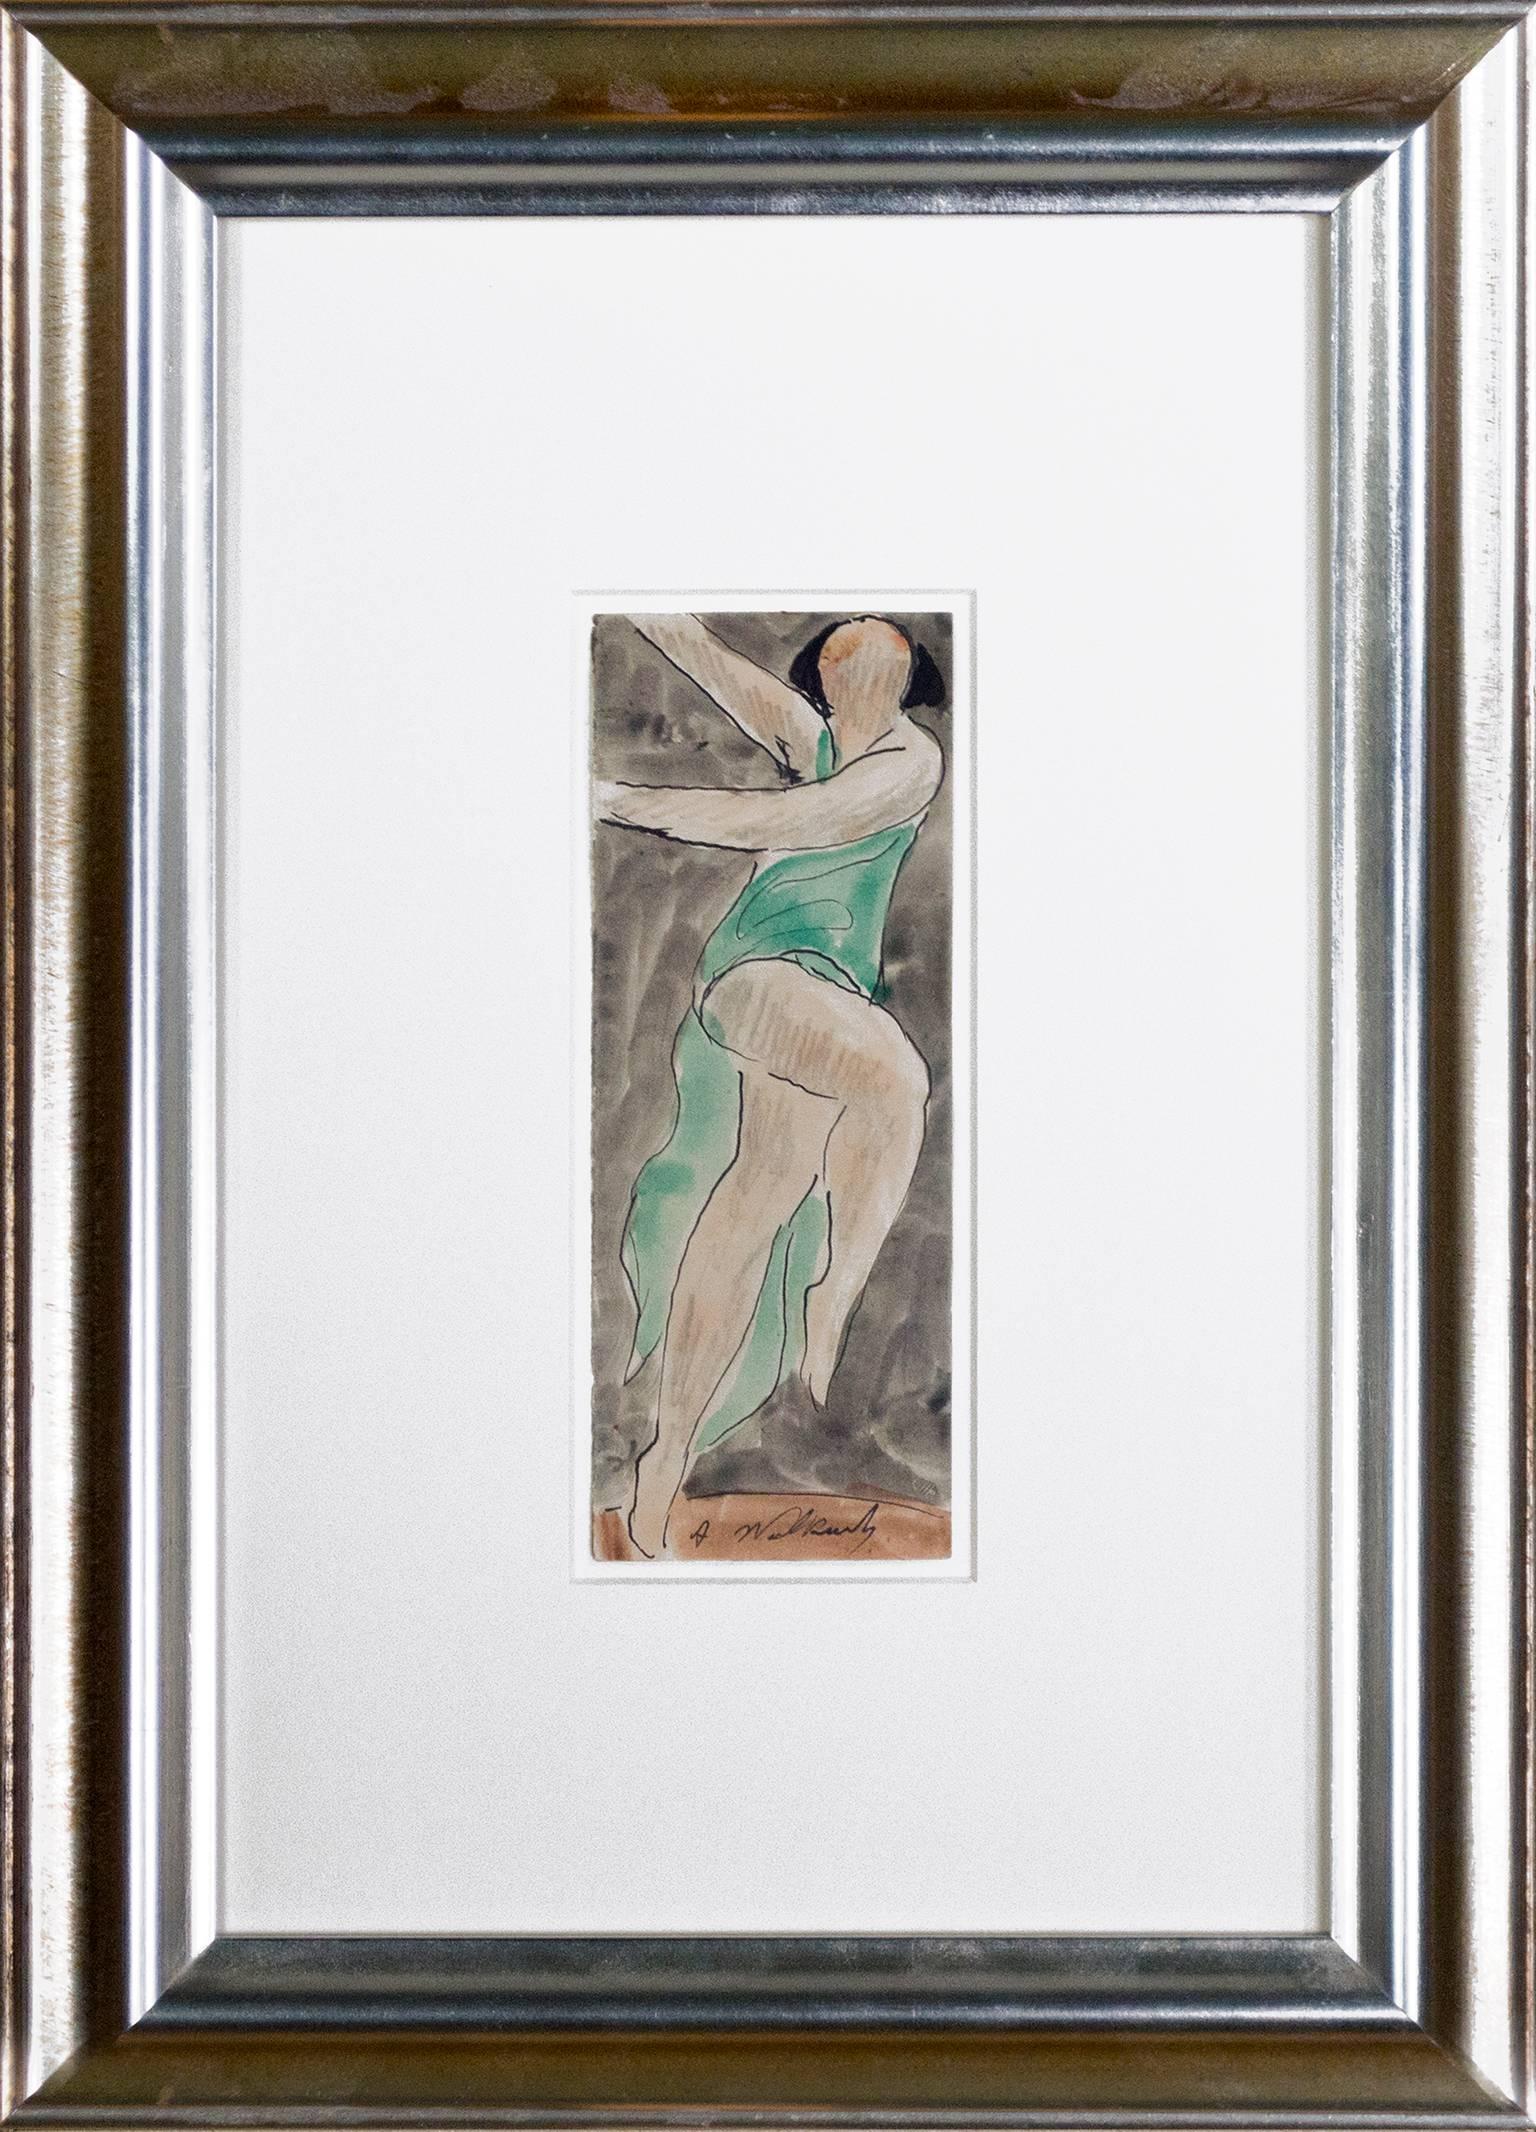 "Isadora Duncan Dancing #3" is an original ink and watercolor piece on cream paper by Abraham Walkowitz. The artist signed the piece in the lower center. The drawing depicts Isadora Duncan, famous American dancer. 

7" x 2 3/4" art
16" x 11 1/2"